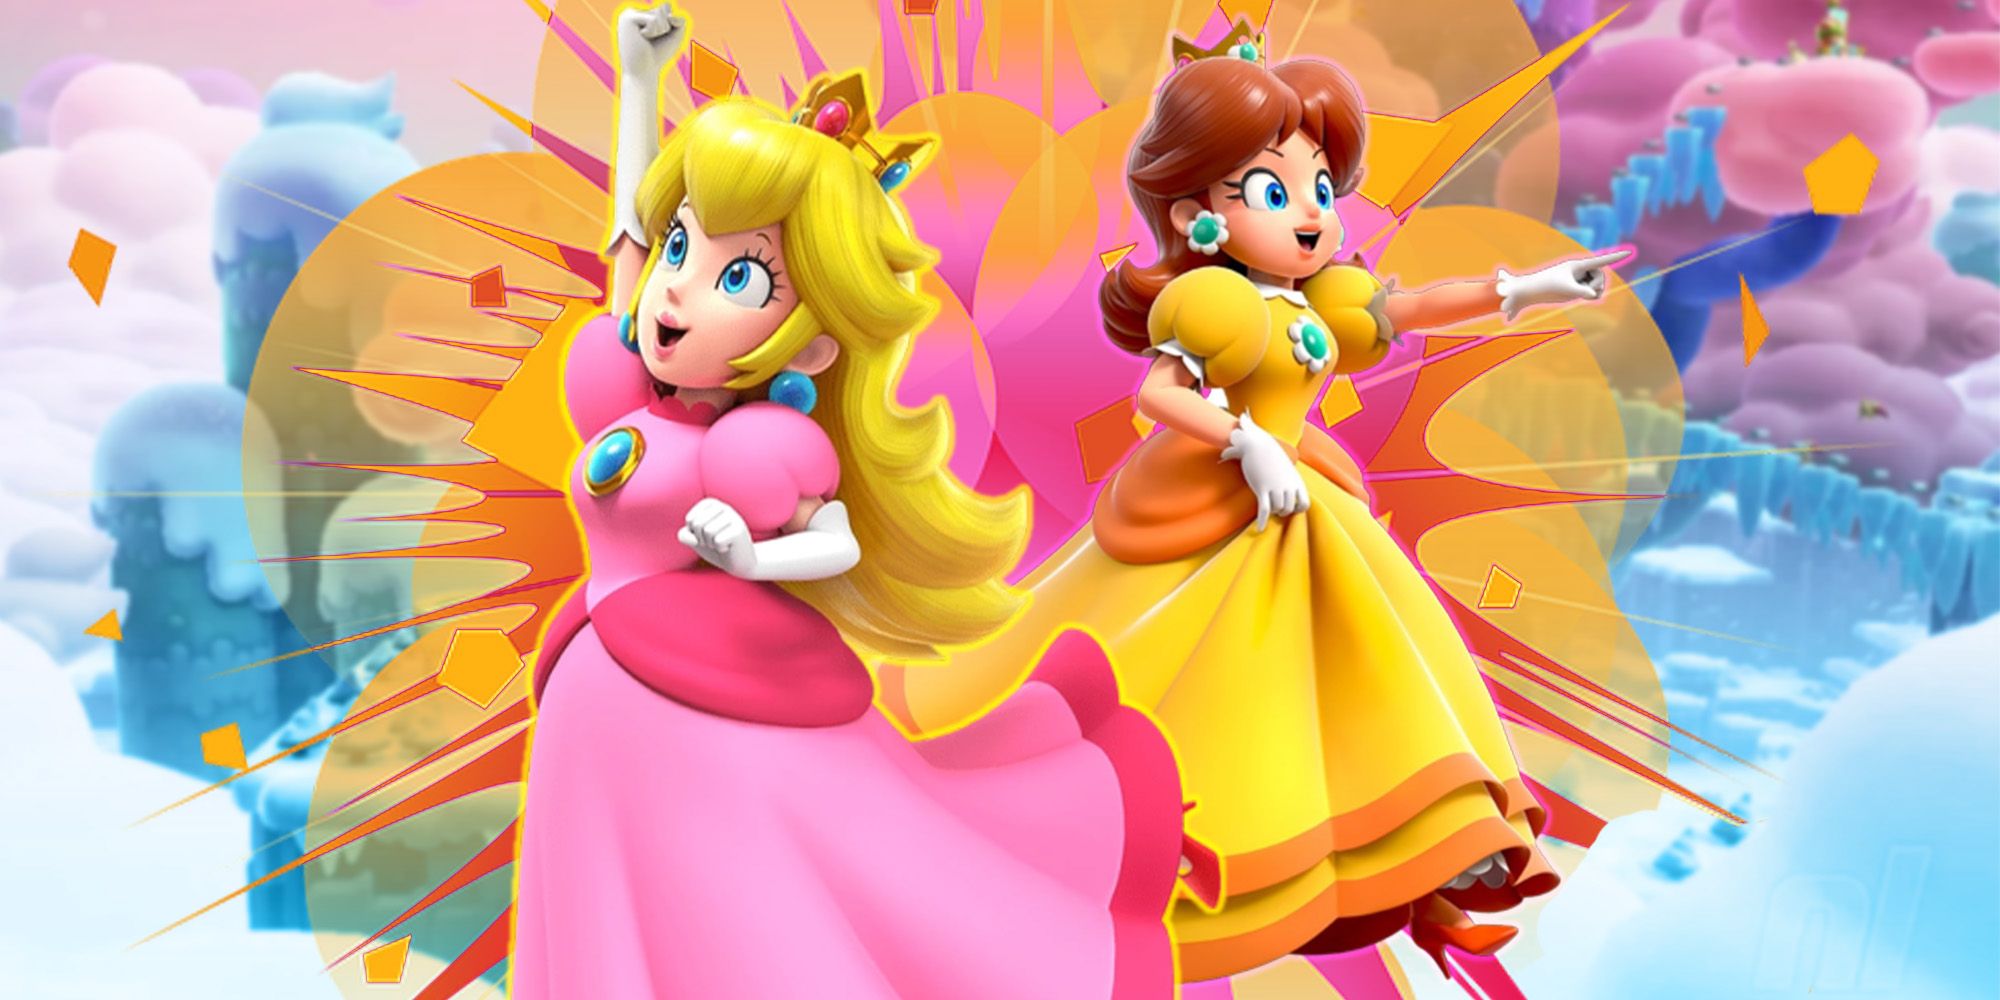 Peach and Daisy from Super Mario Bros. Wonder in front of Fluff-Puff Peaks.